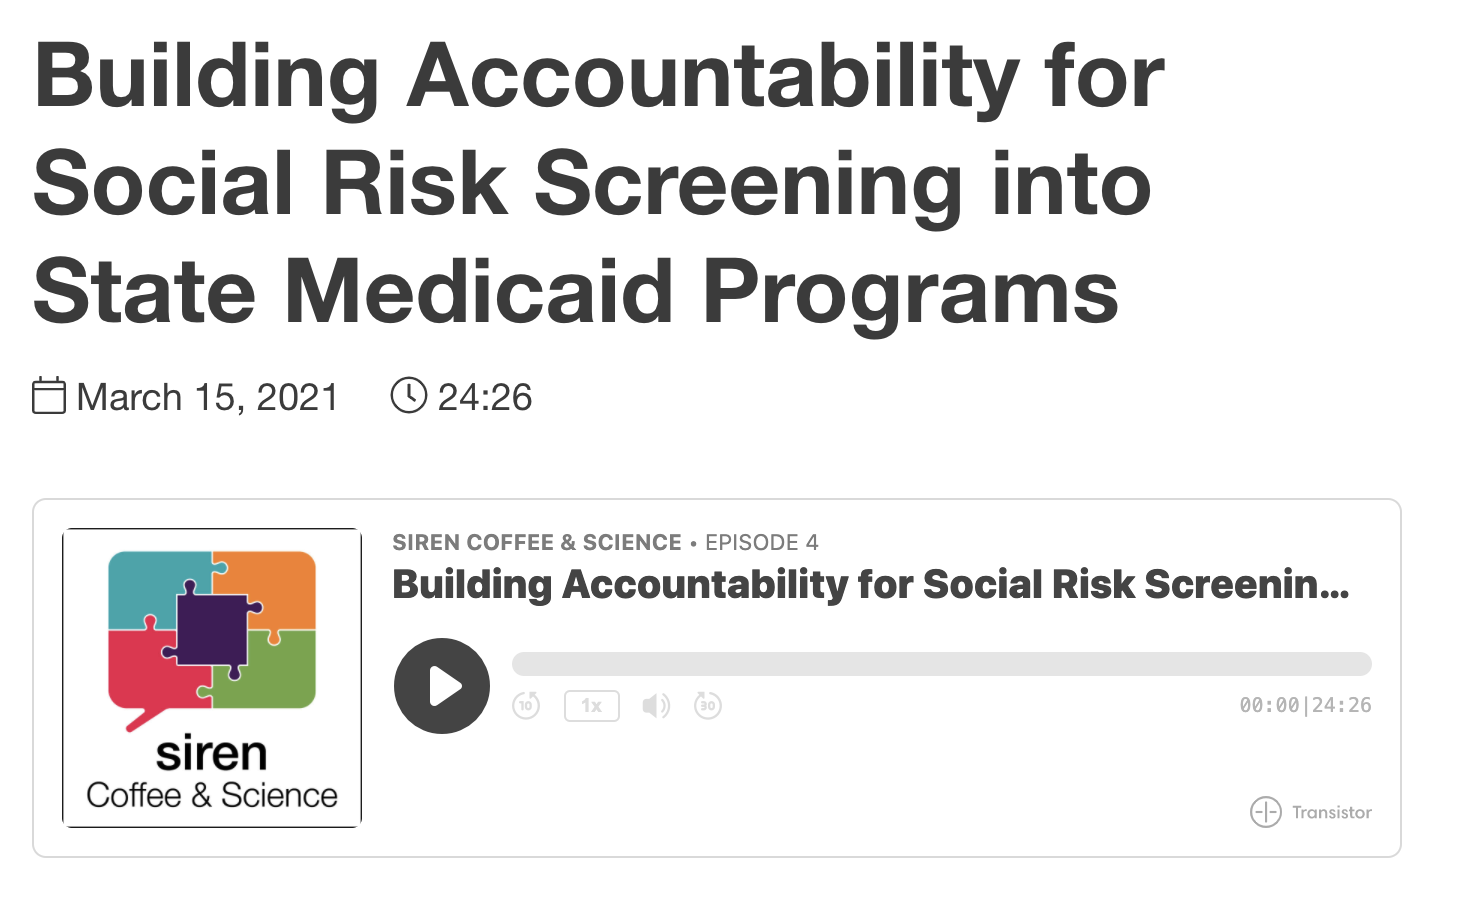 Building Accountability for Social Risk Screening into State Medicaid Programs